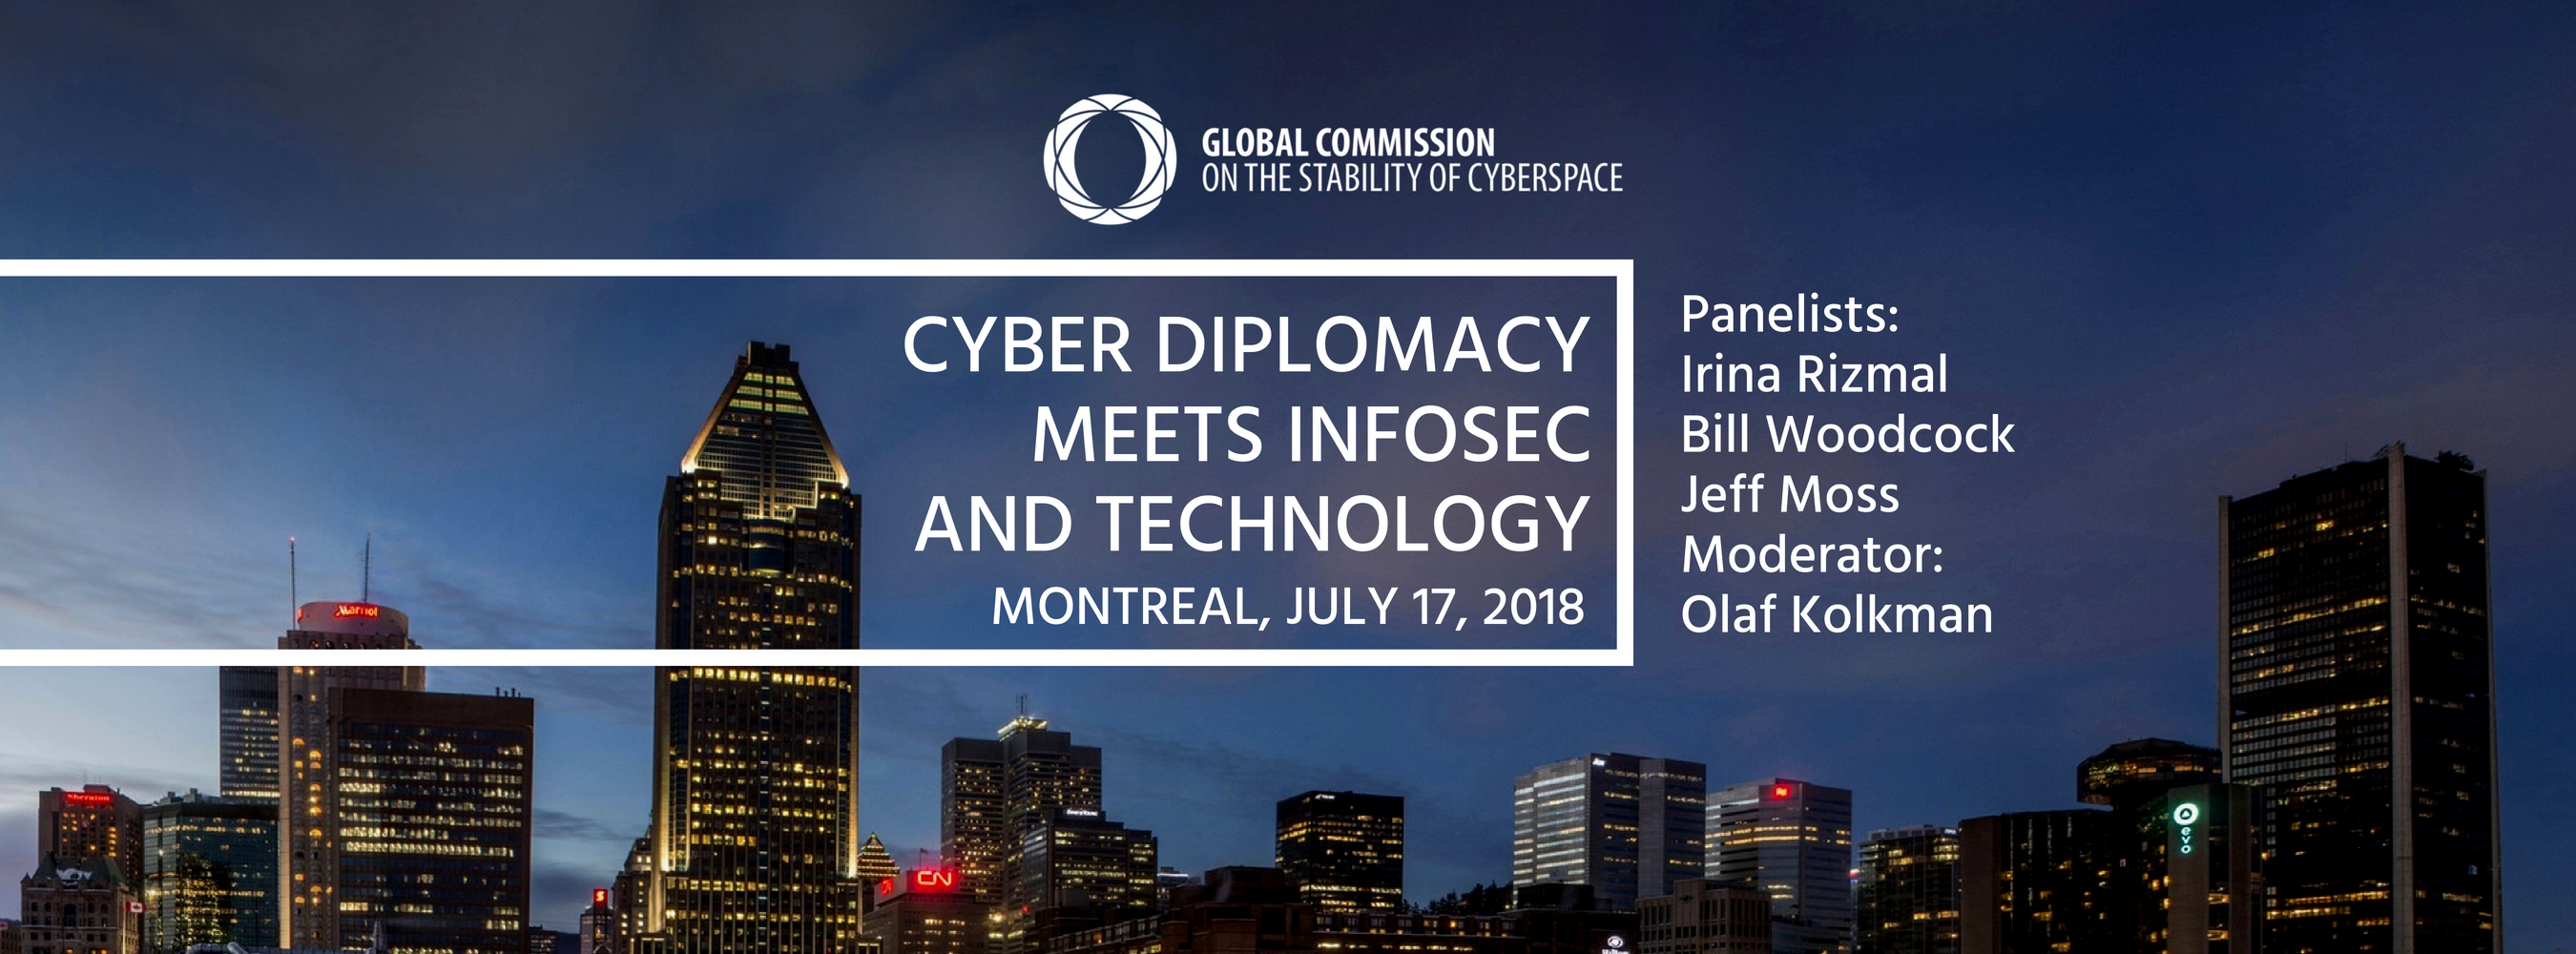 At IETF 102: The Global Commission on the Stability of Cyberspace – Cyber diplomacy meets InfoSec and Technology